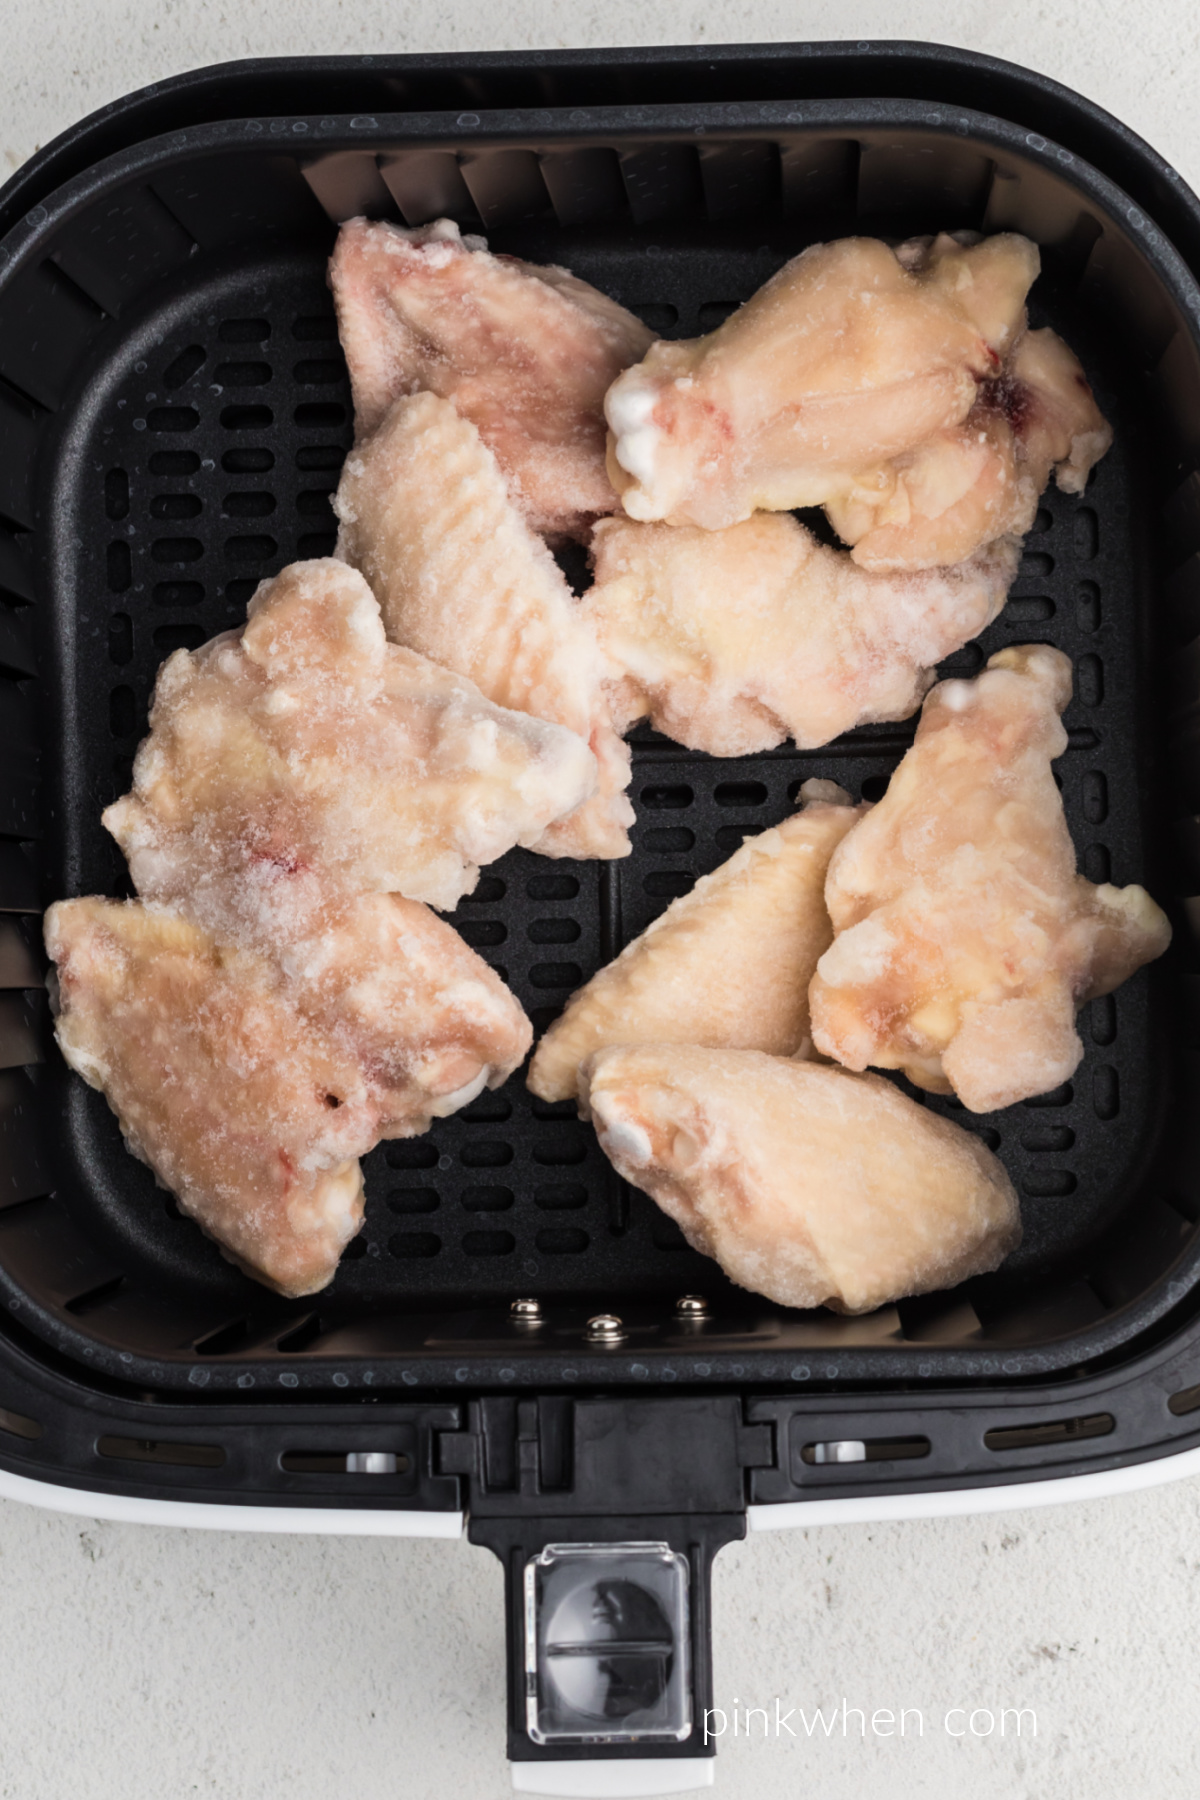 Naked frozen chicken wings in the basket of the air fryer.